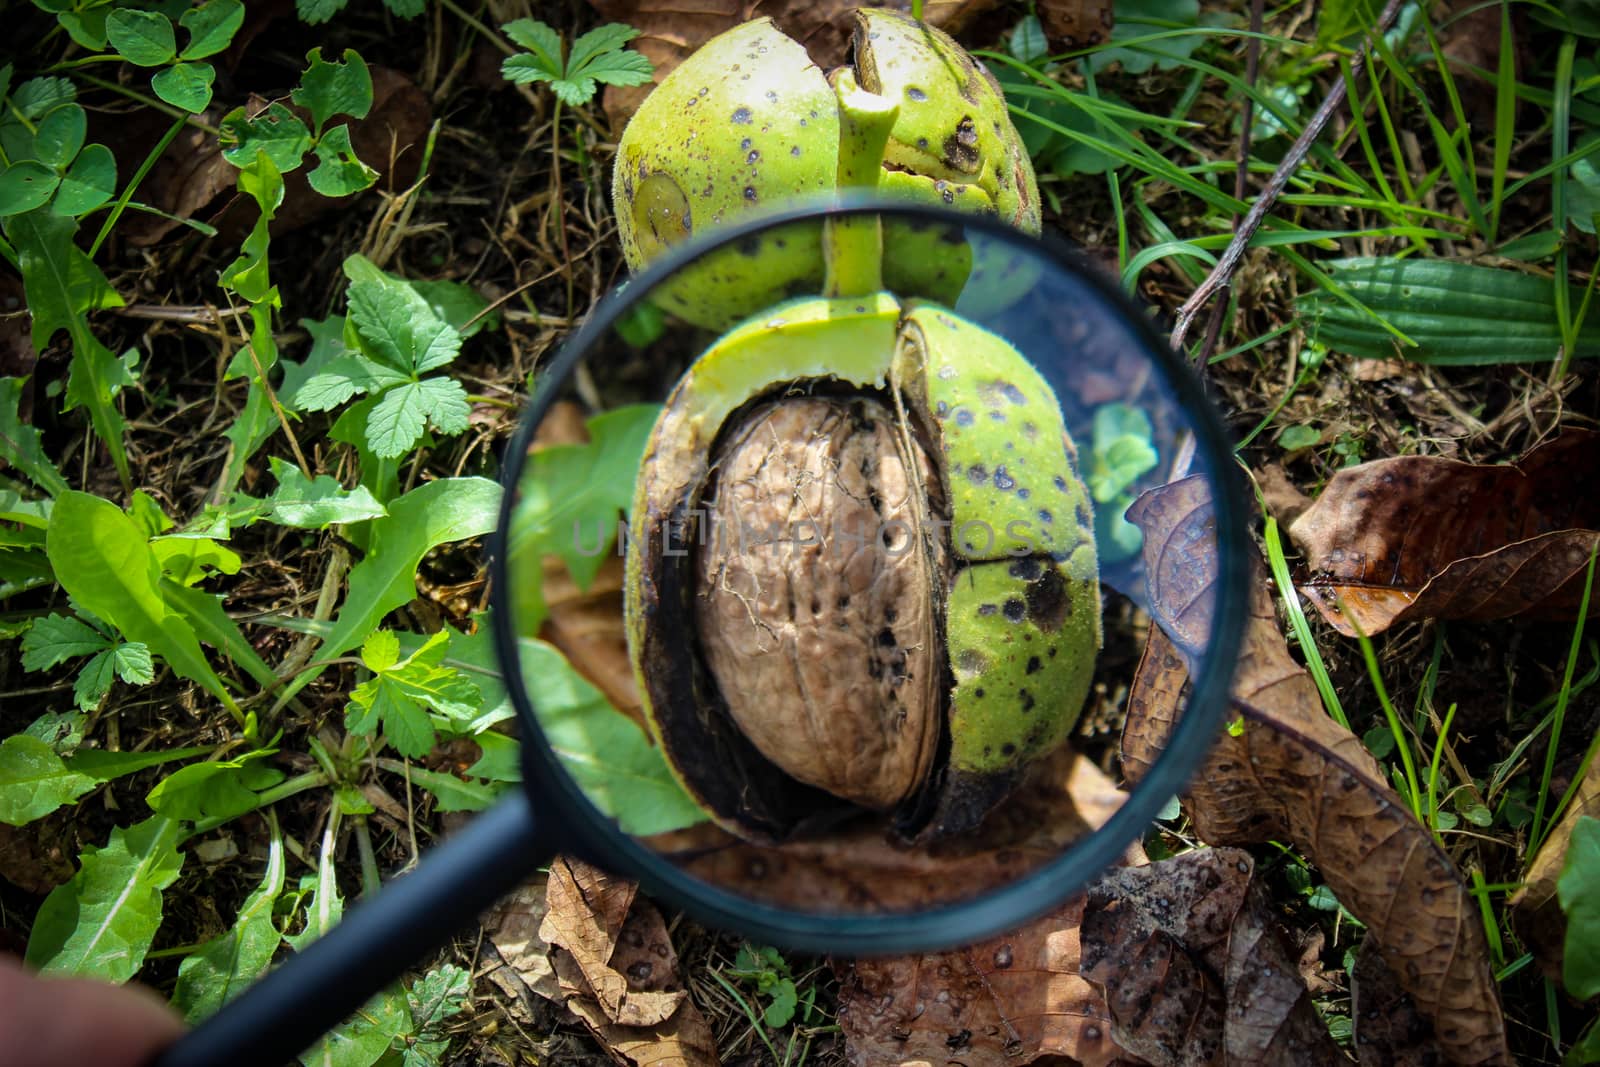 Walnut fruit inside the cracked green shell of the walnut on the ground is magnified through a magnifying glass. Zavidovici, Bosnia and Herzegovina.